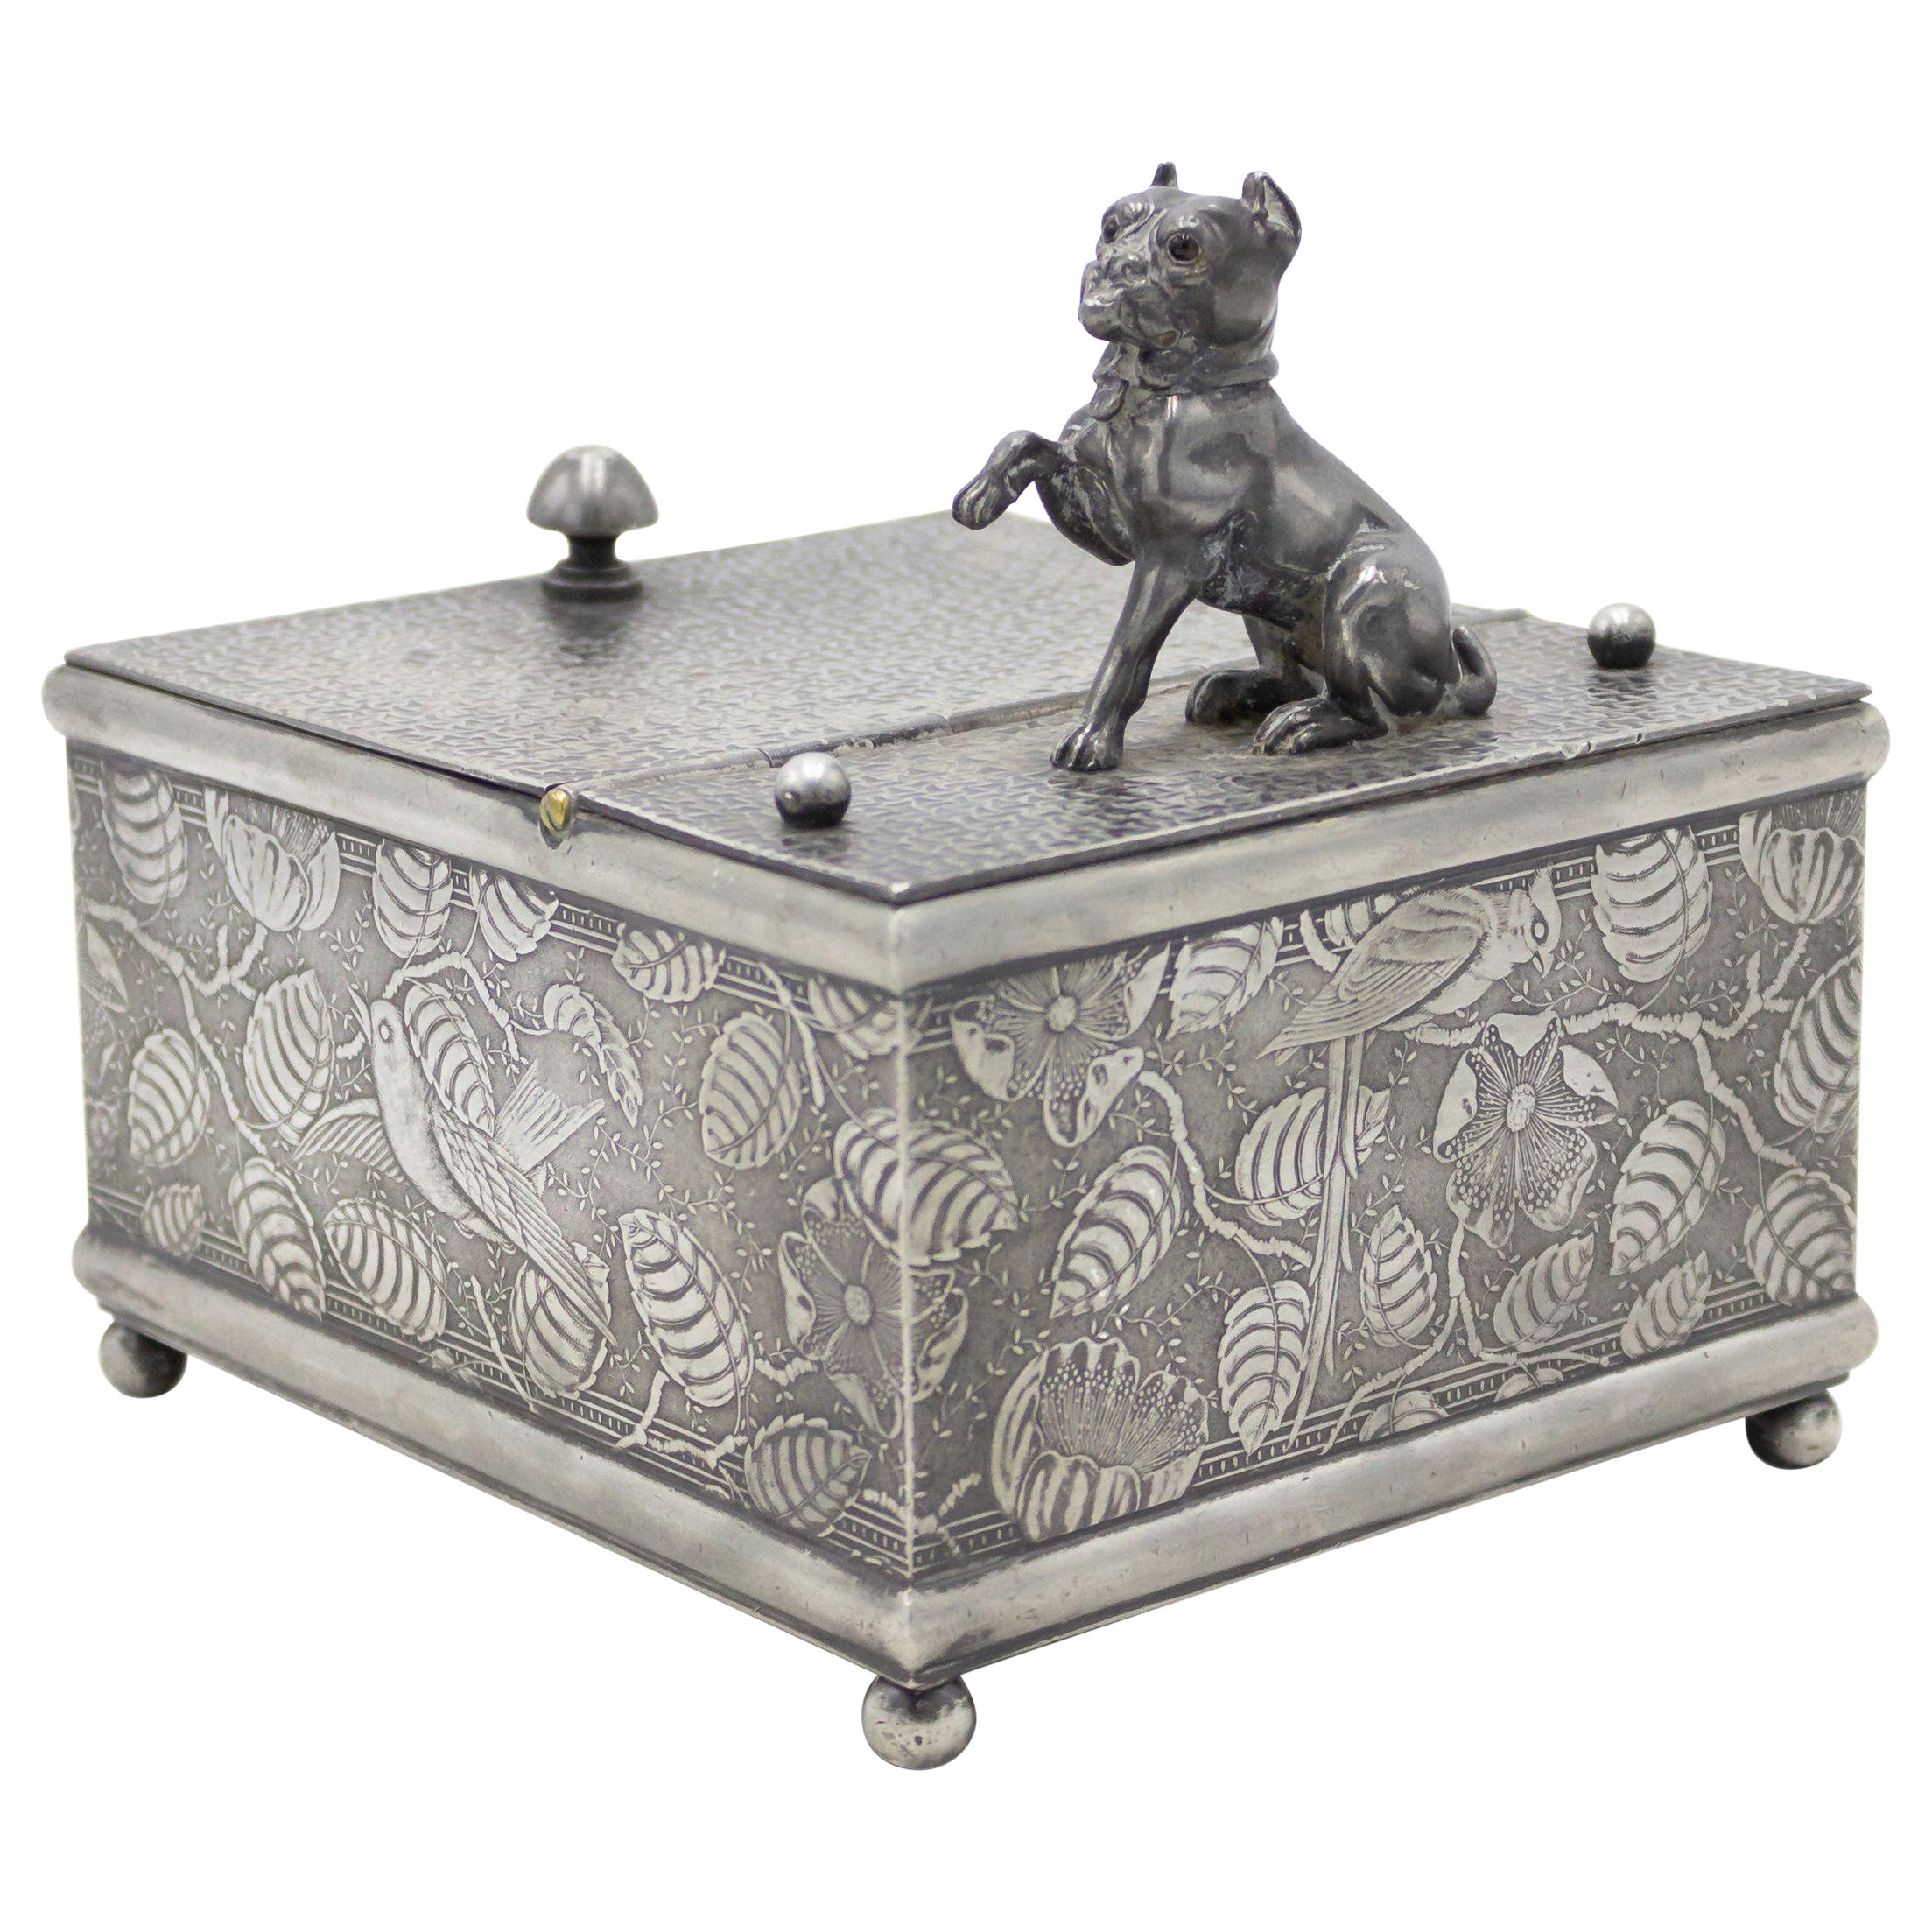 English Arts & Crafts Pewter Box with Dog Figure